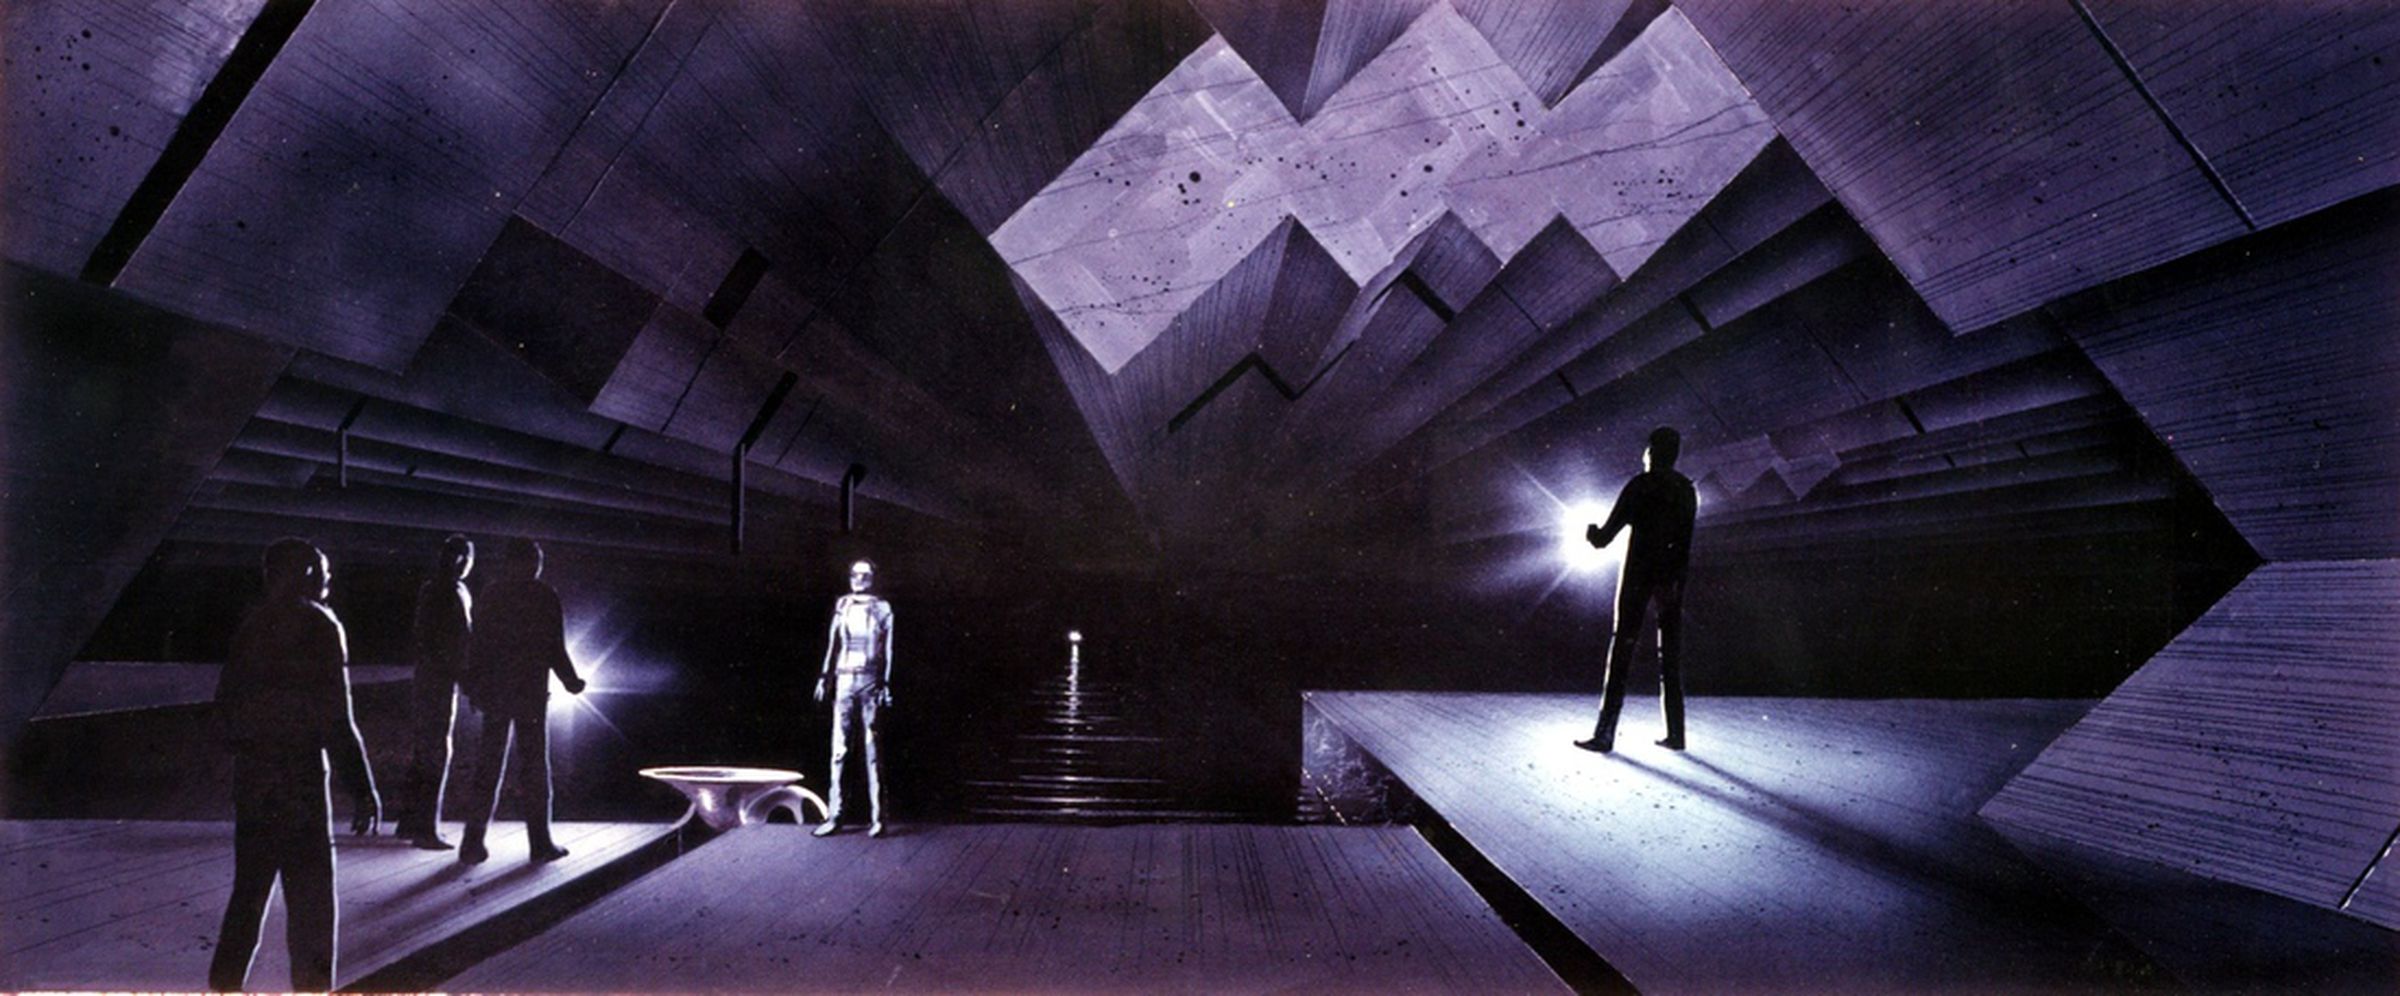 Pre-production artwork from 'Dune'